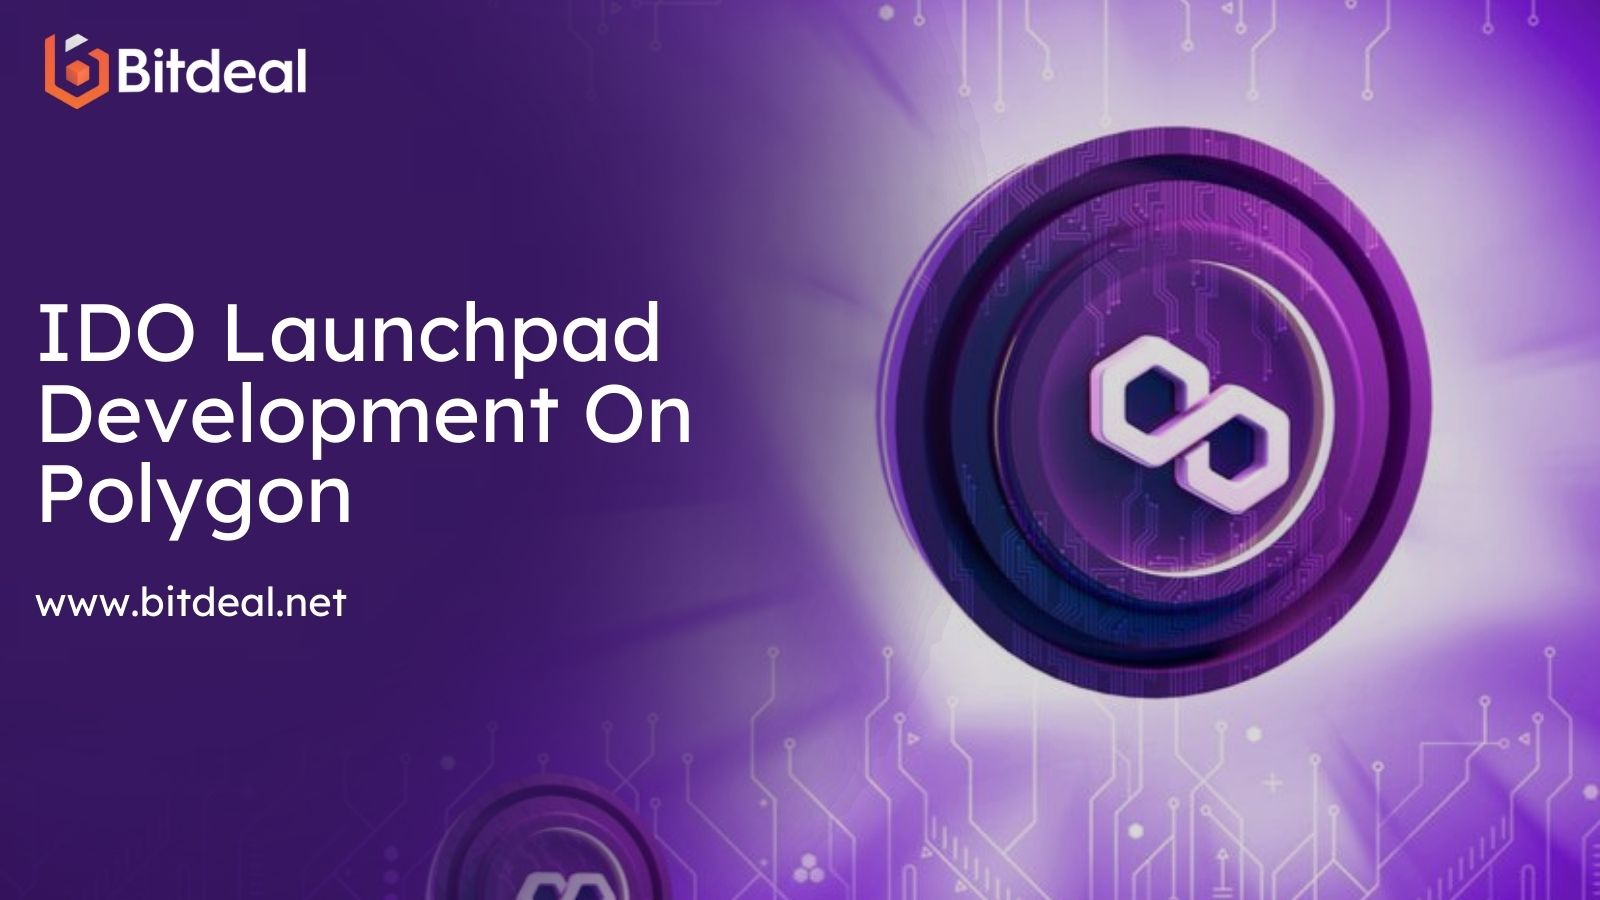 Enrich IDO Token Sales By Creating IDO Launchpad On Polygon